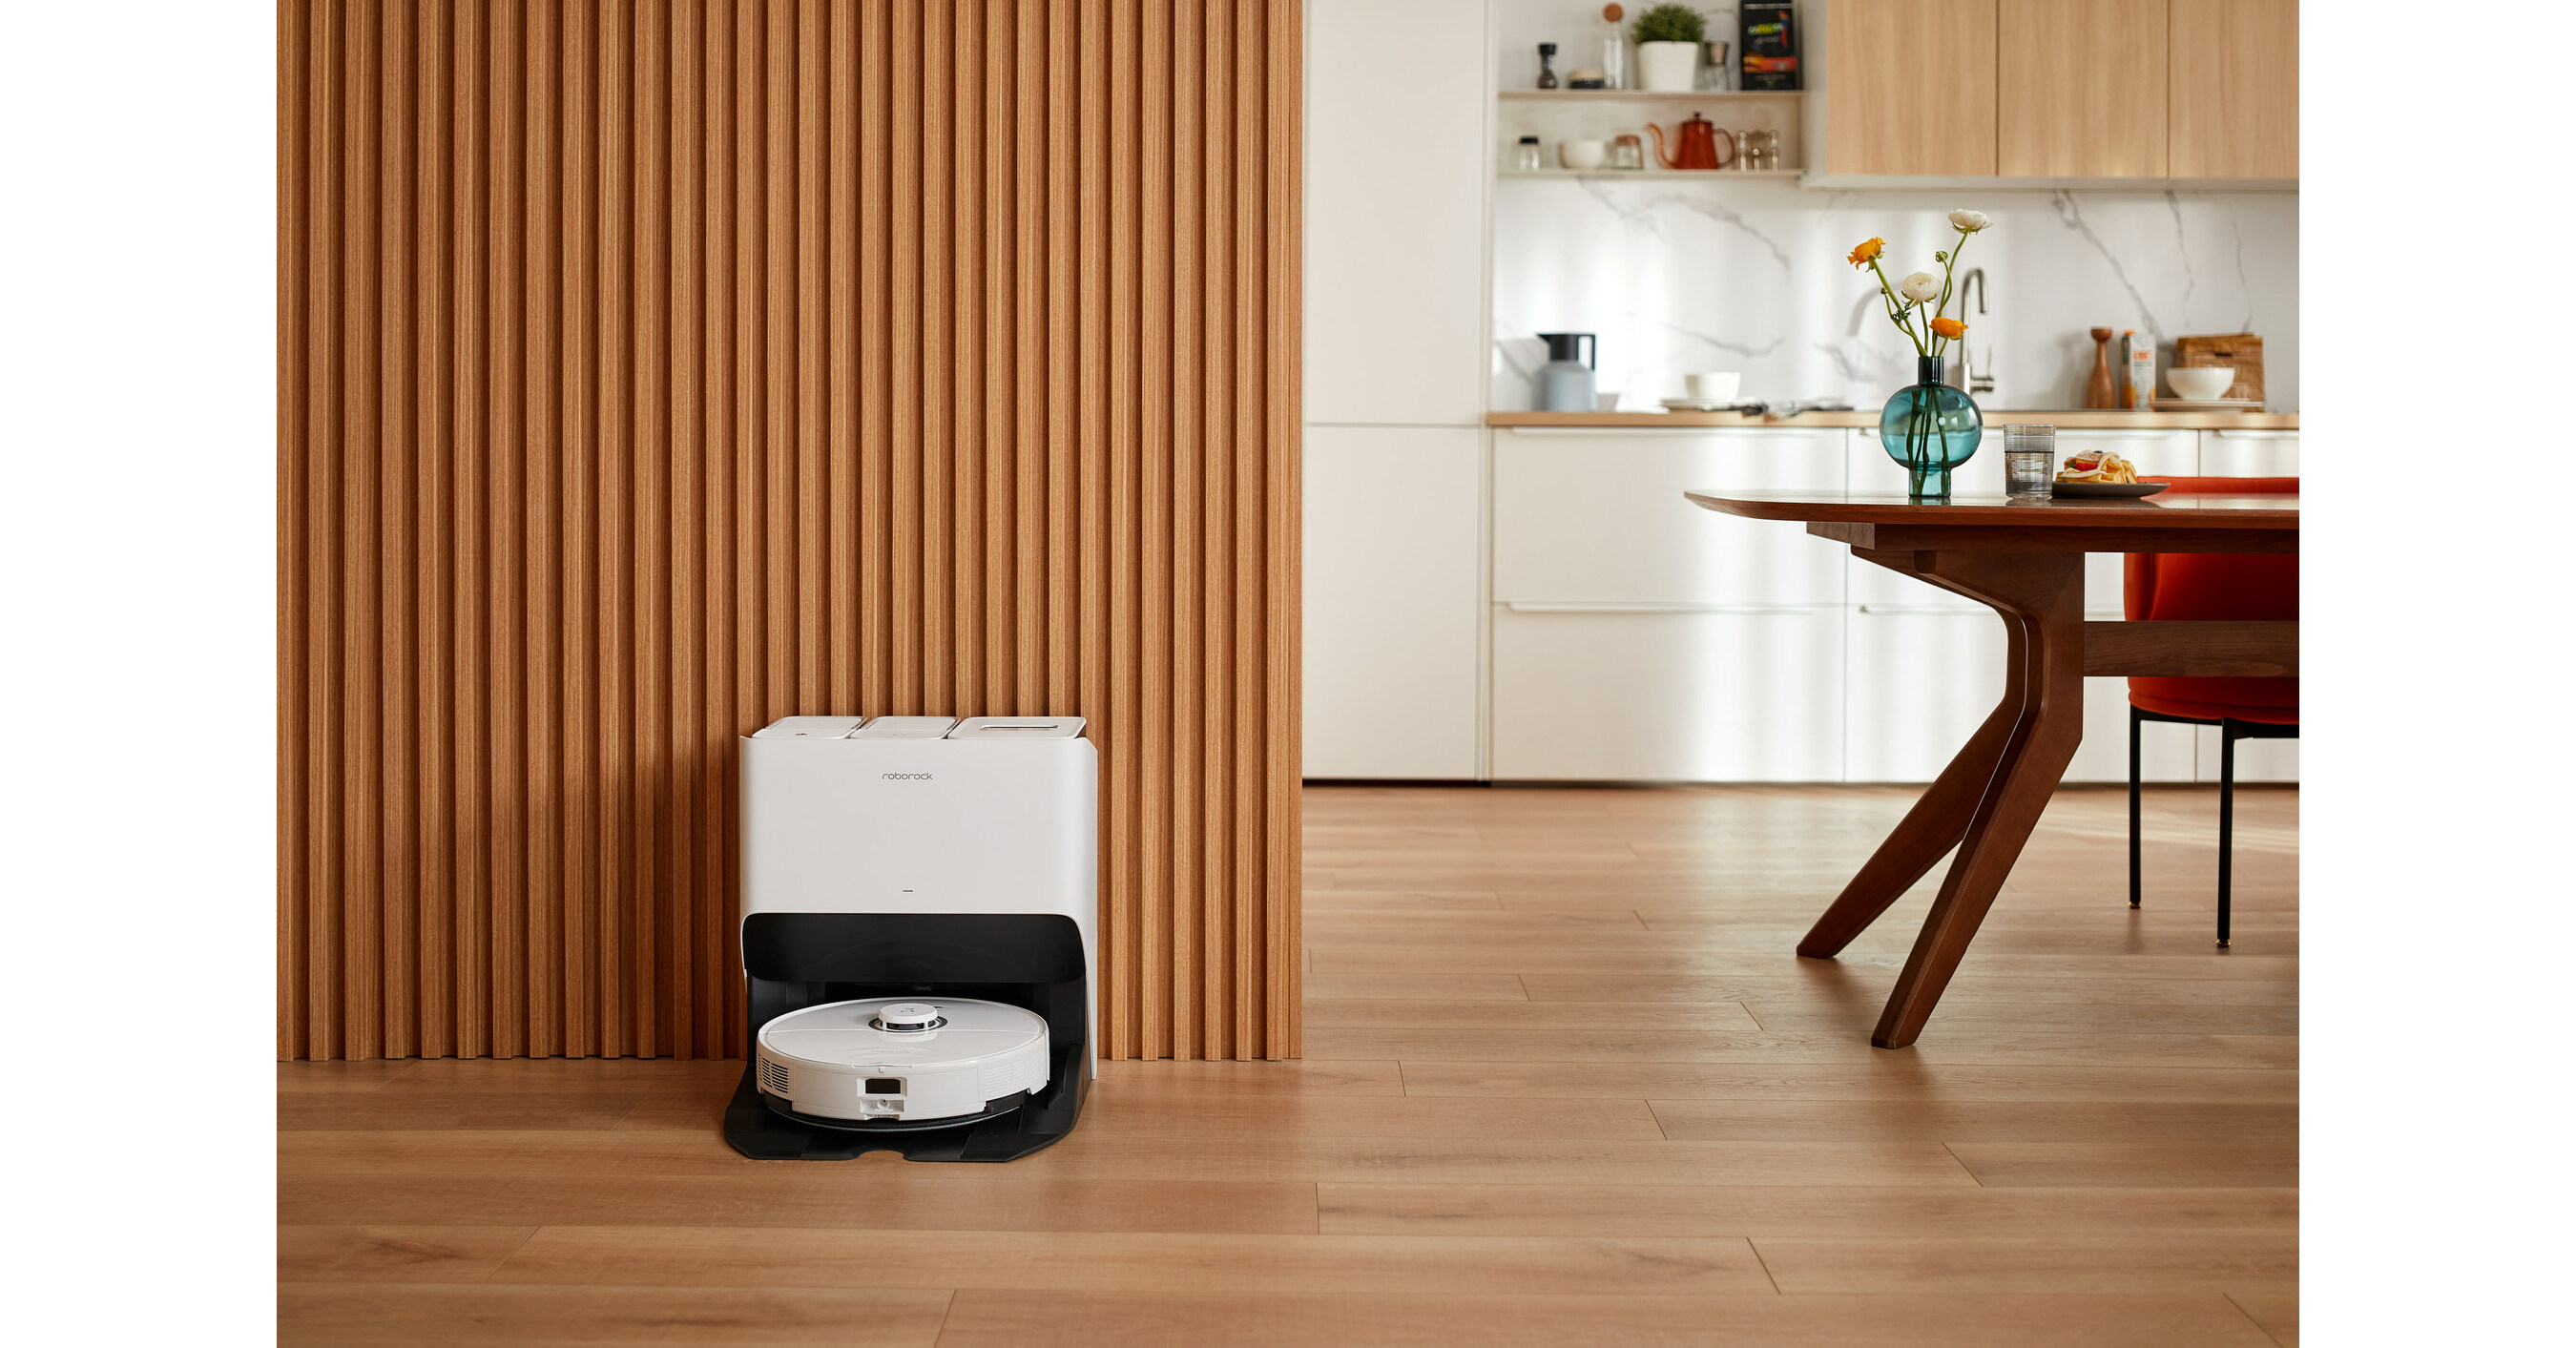 CES 2022: Roborock's new dream machine mops, vacuums and cleans